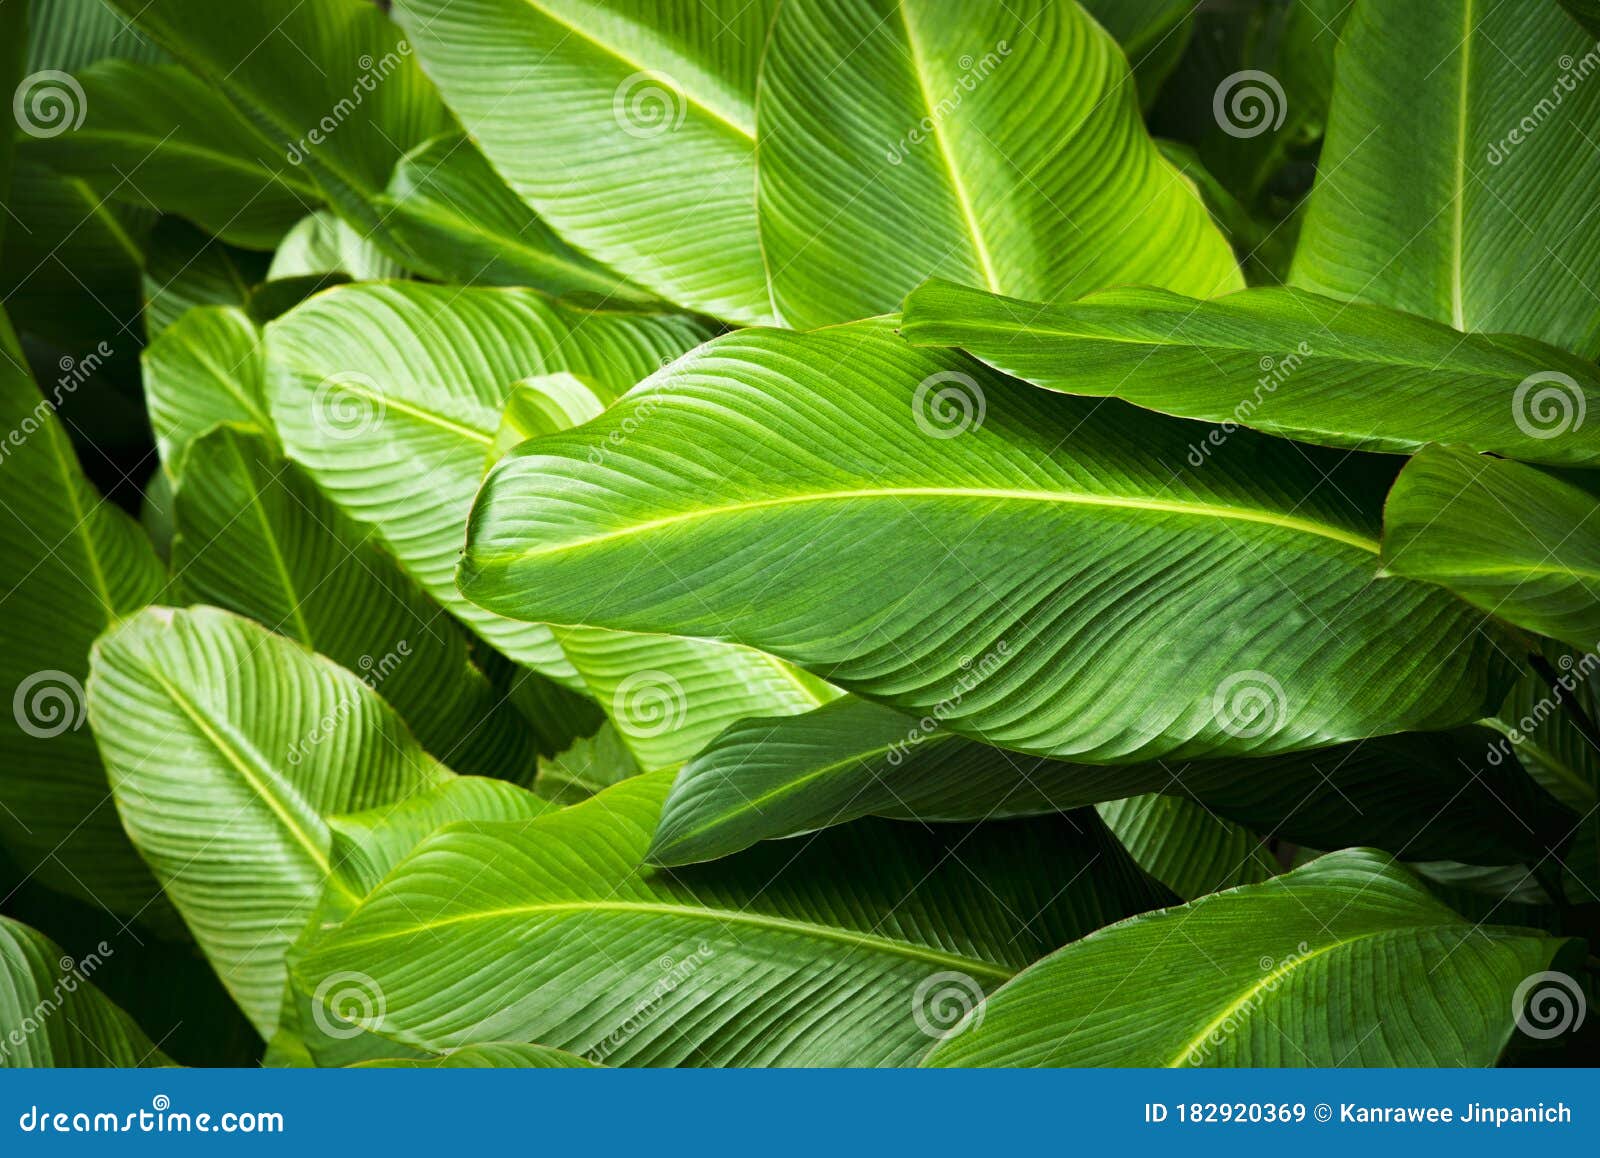 Tropical Banana Leaf Texture, Large Palm Foliage Nature Dark Green in